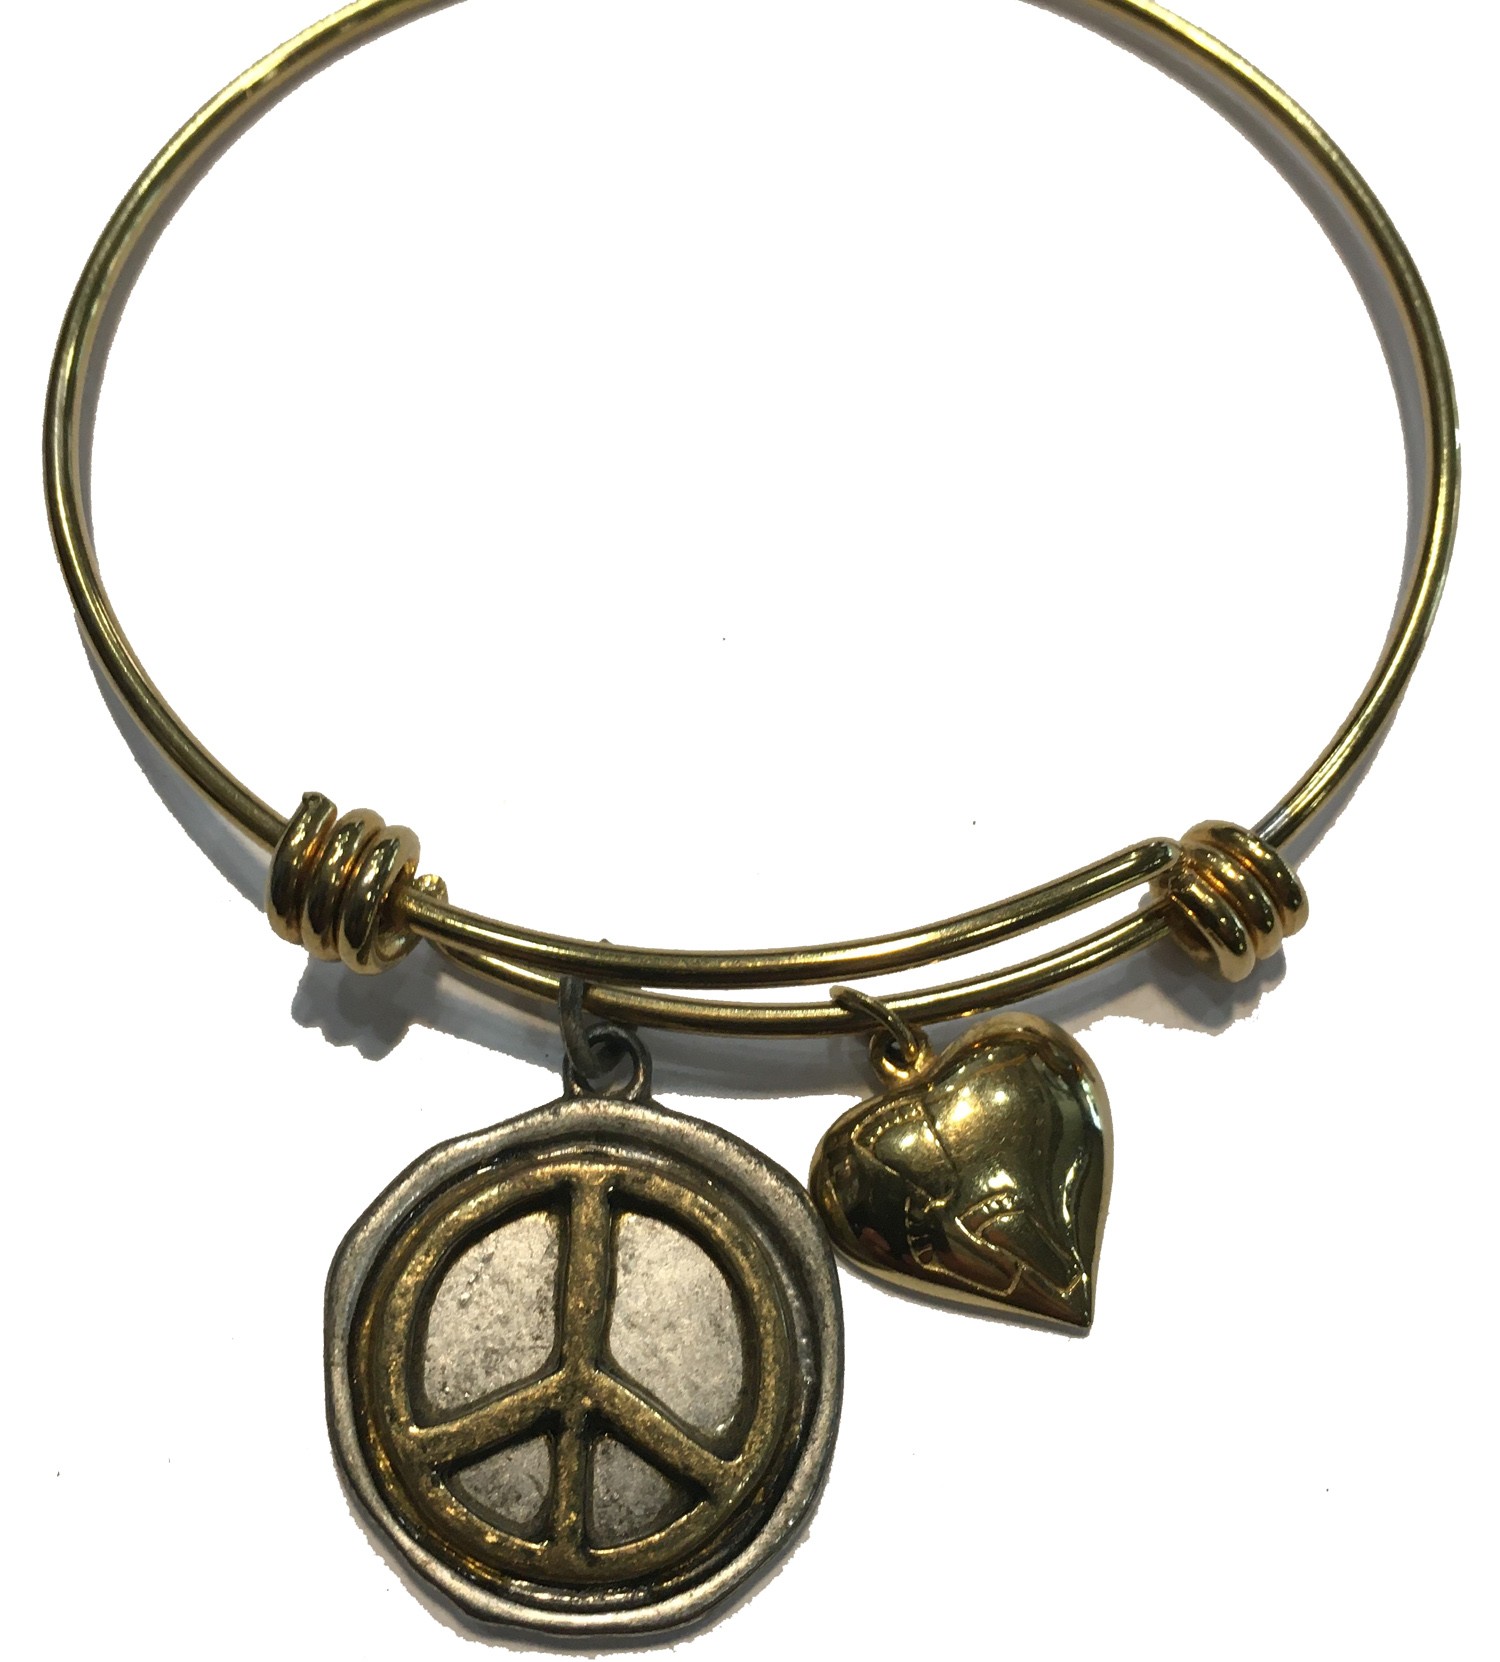 ALEX & ANI STYLE BRACELET WITH PEACE SIGN STAINLESS STEEL